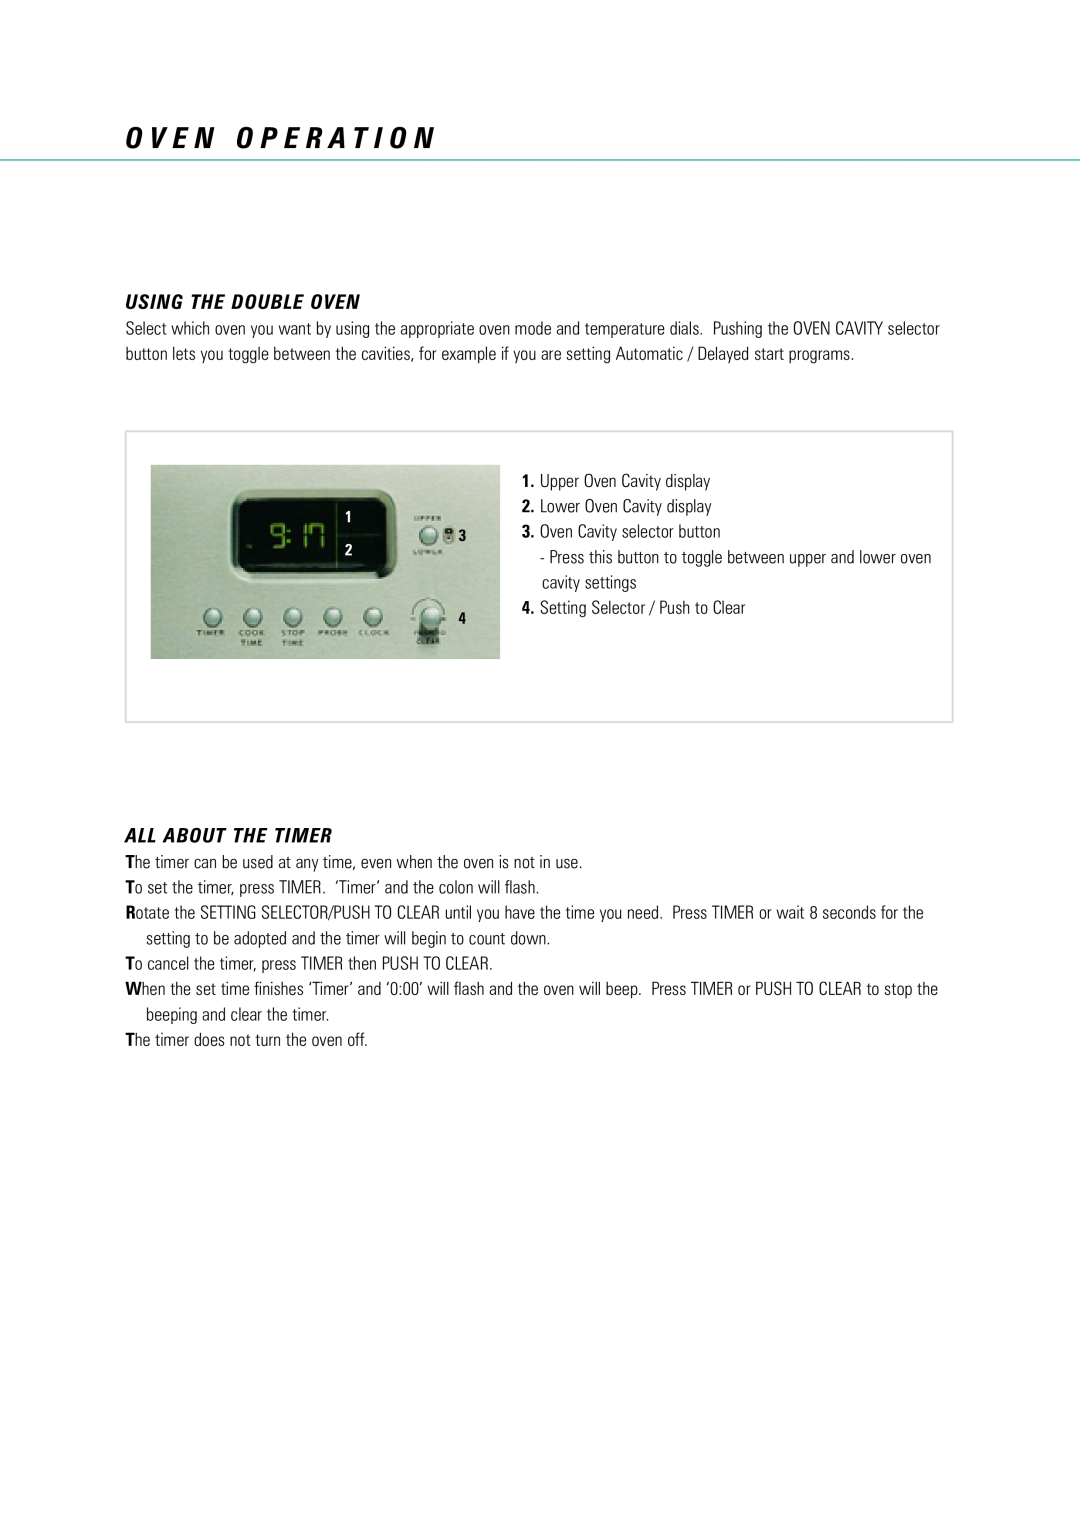 Fisher & Paykel AeroTech manual O V E N O P E R A T I O N, Using The Double Oven, All About The Timer 